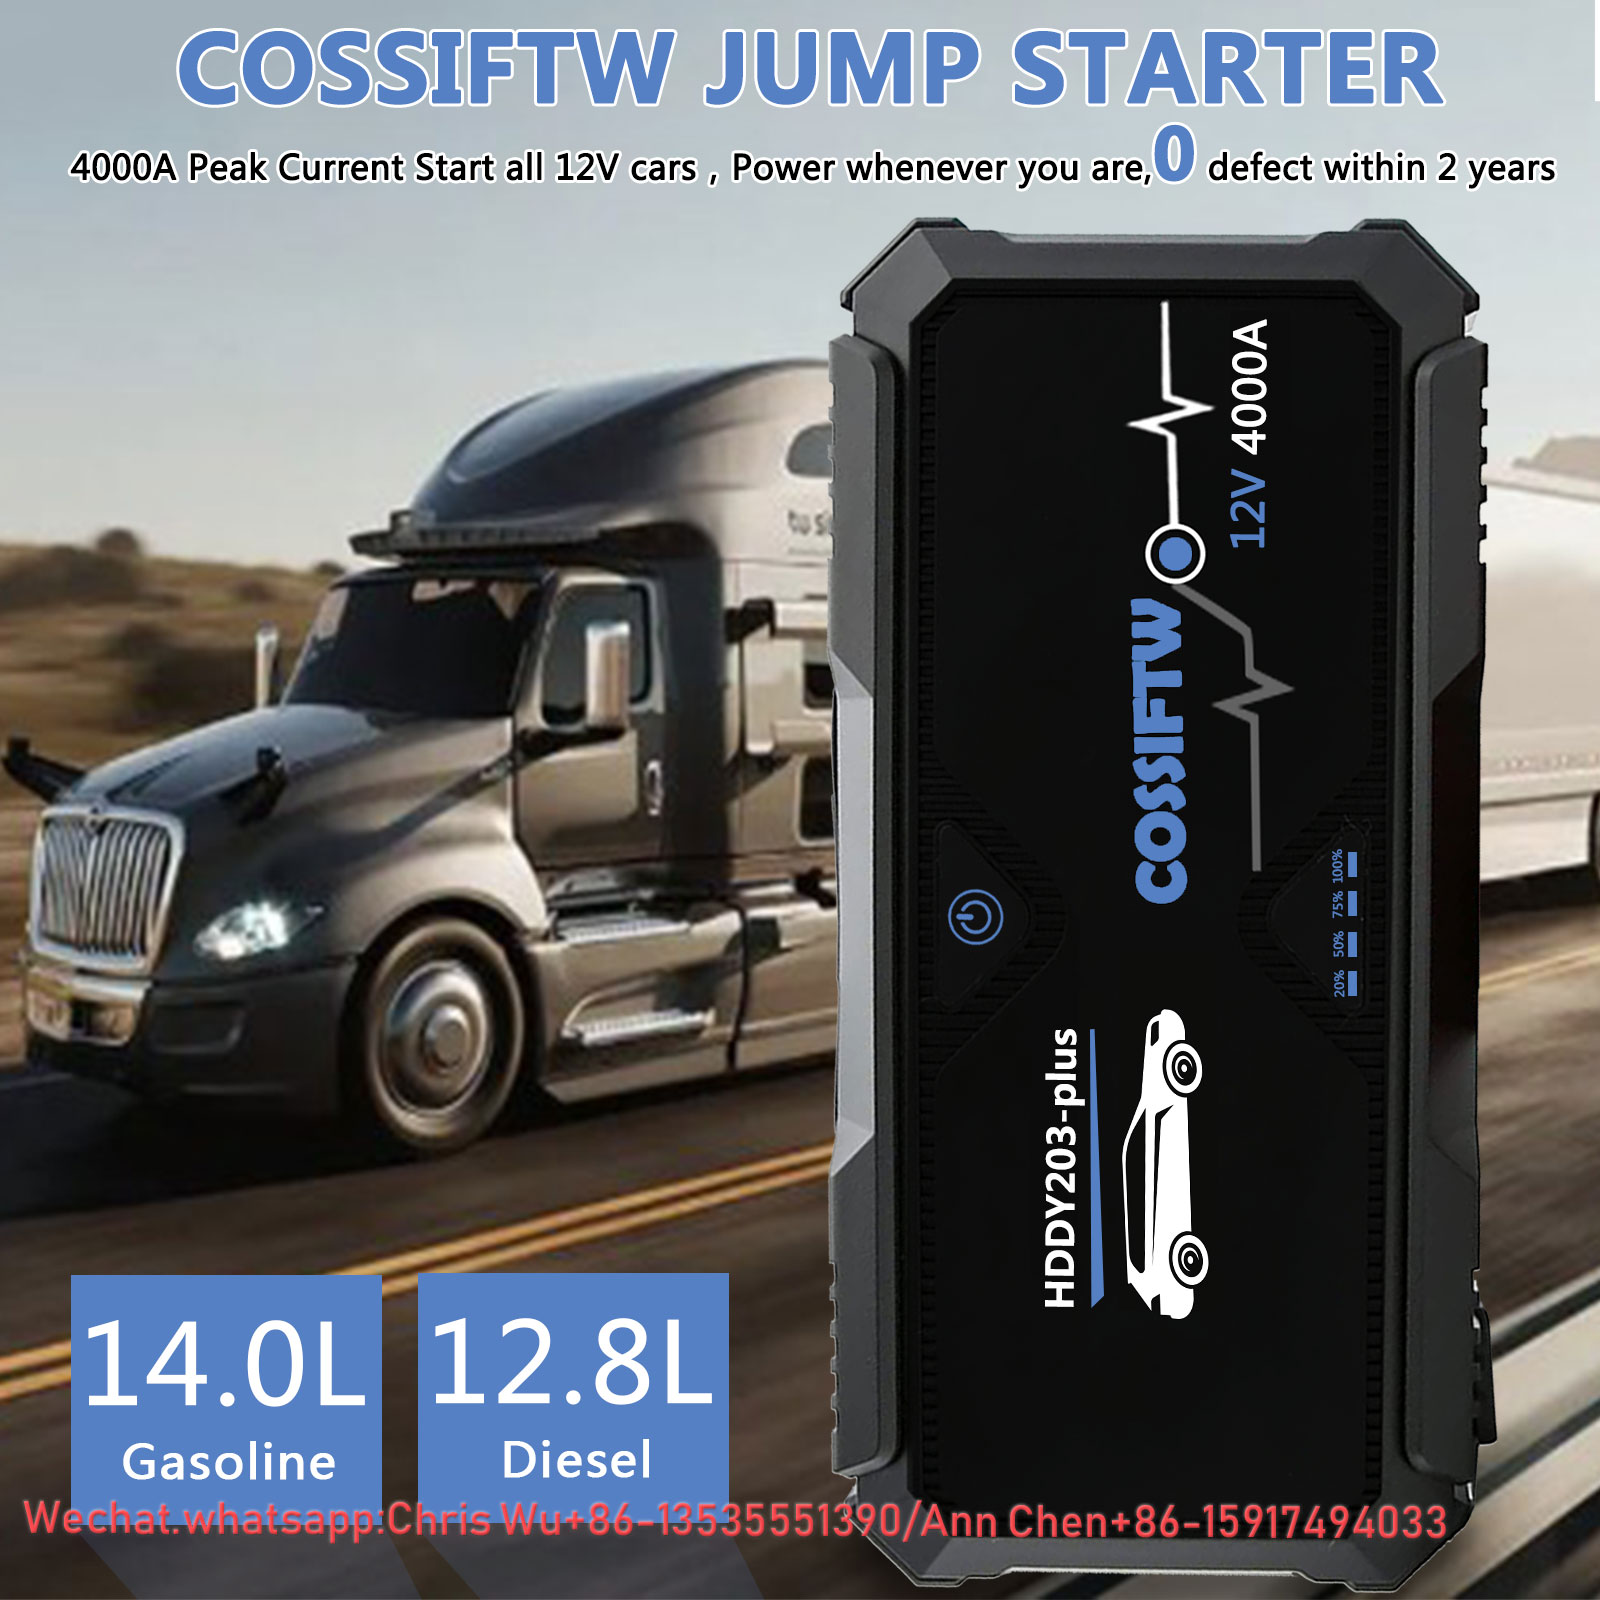 COSSIFTW PORTABLE BATTERAL JUPTER Starter Power Bank 24000mAh Tragbarer Ladegerät Power Bank Multi Charger mit QC 3.0